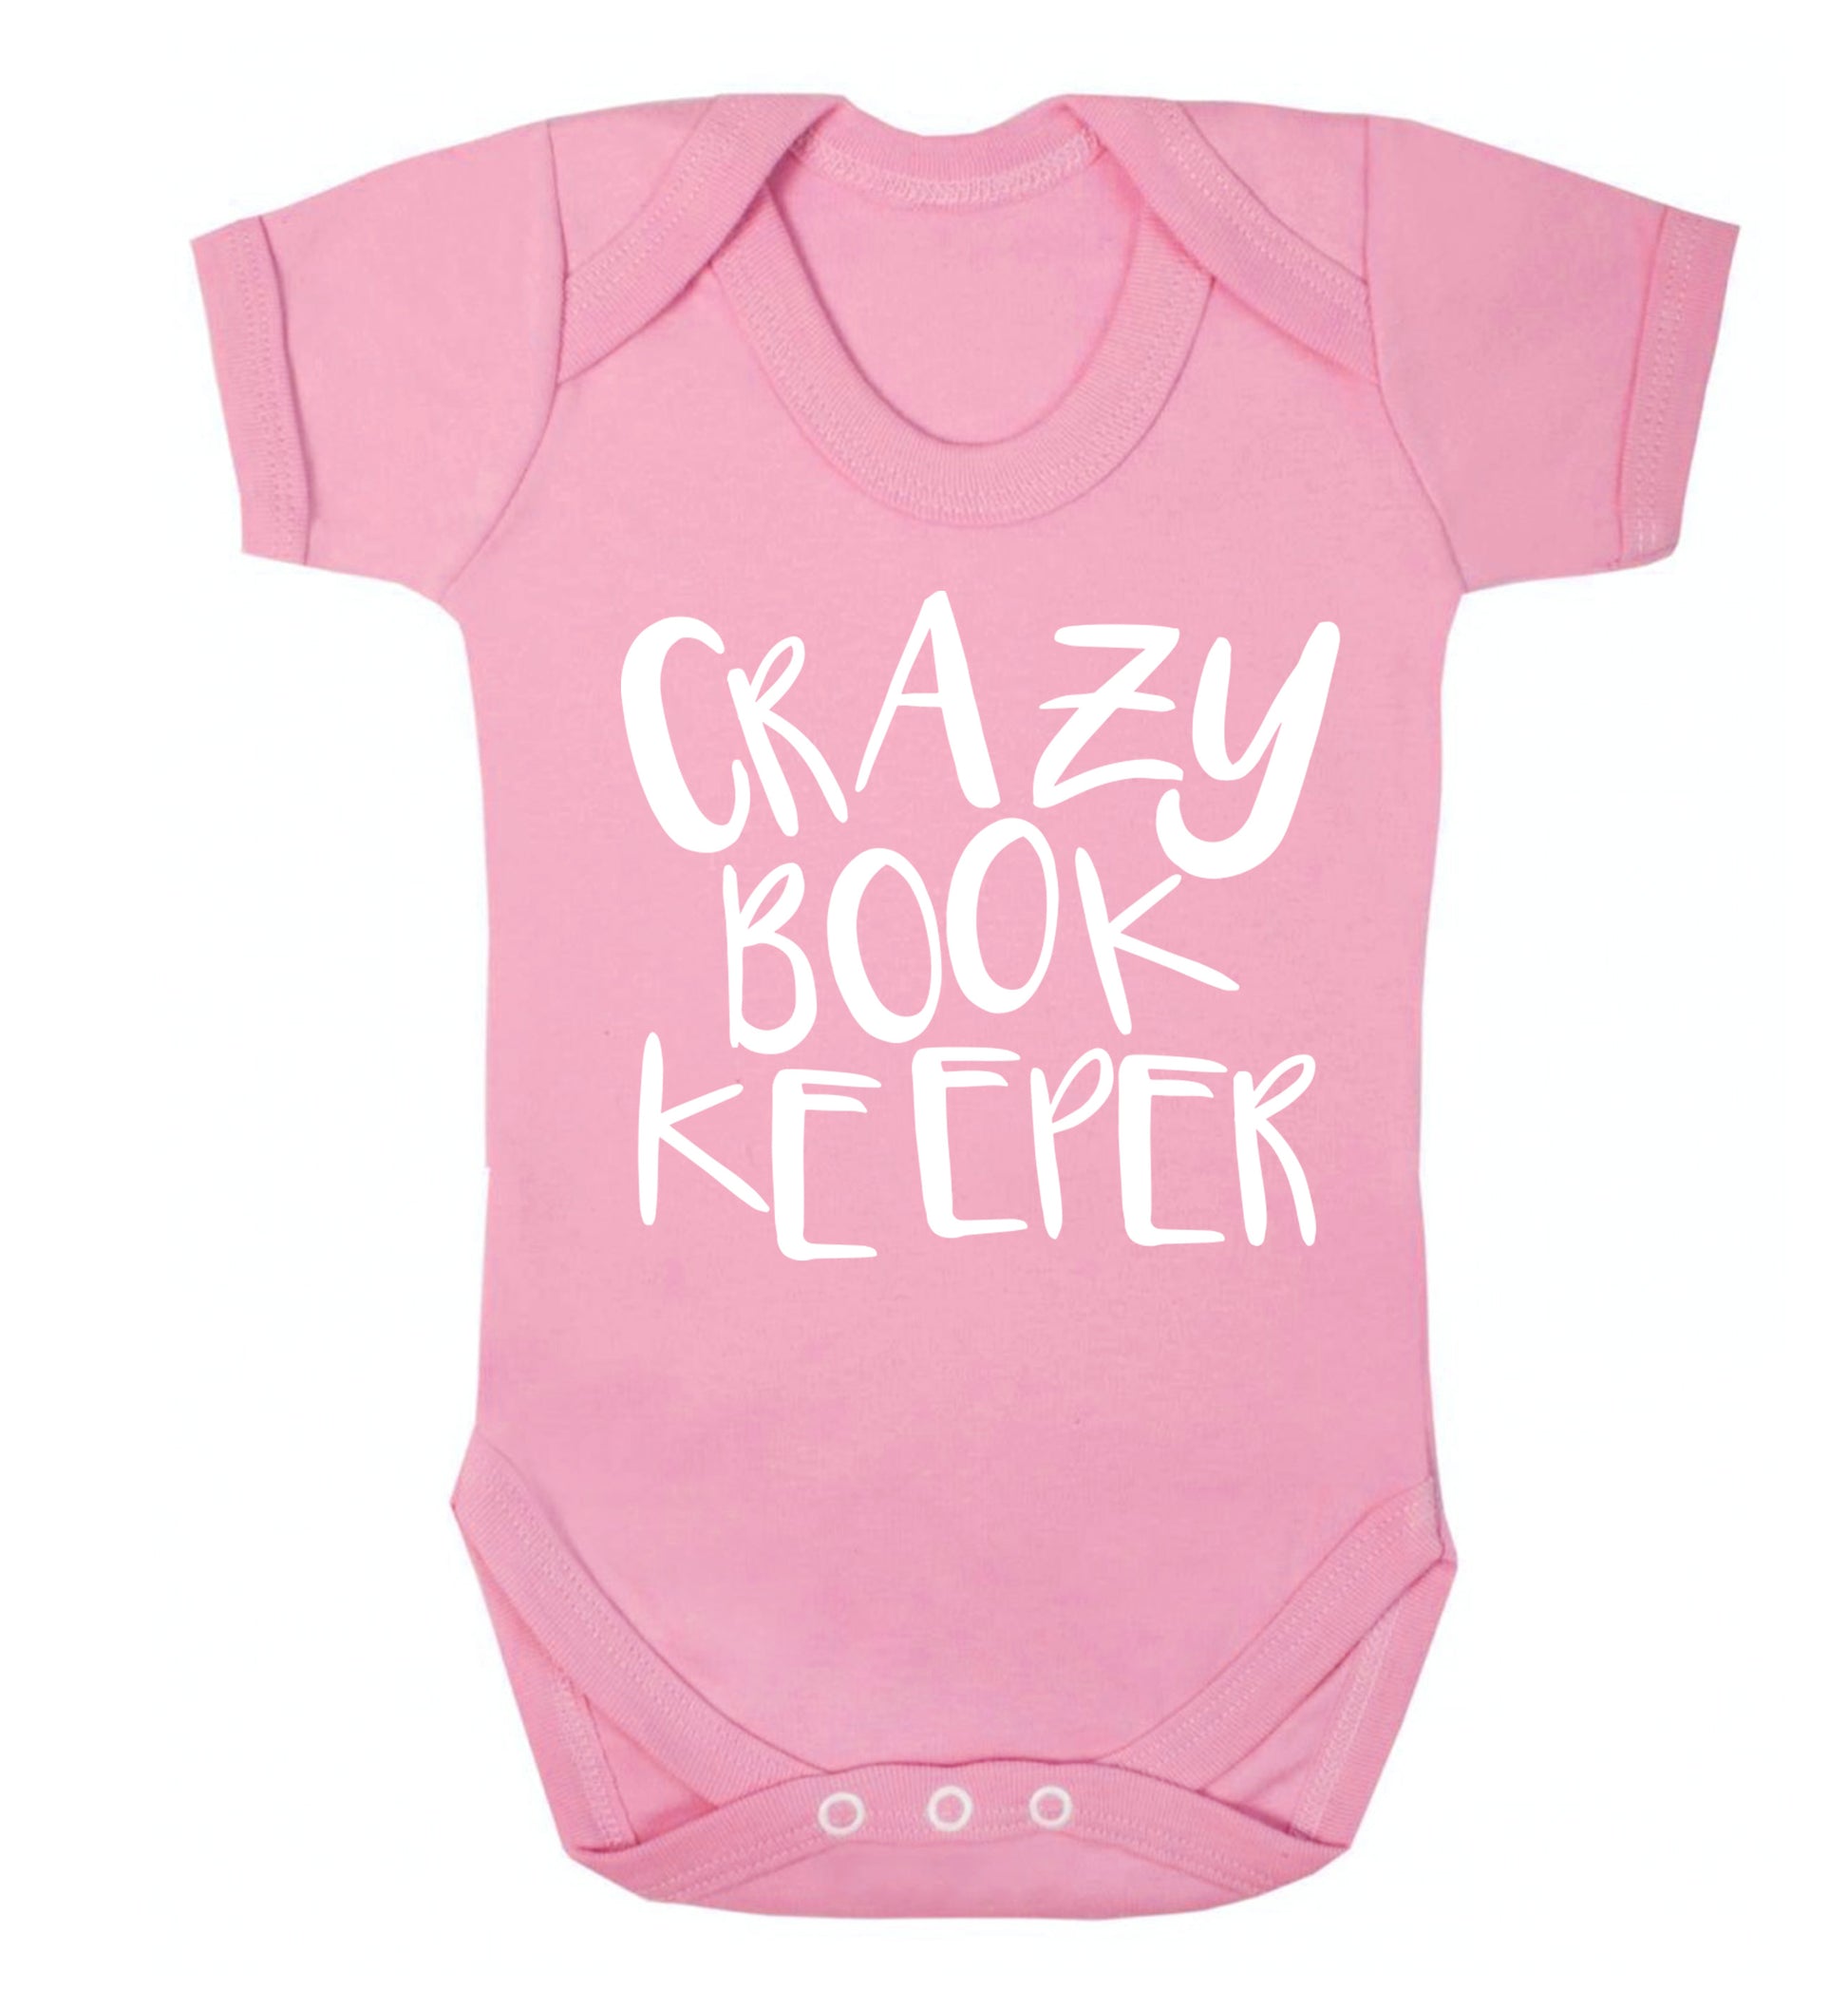 Crazy bookkeeper Baby Vest pale pink 18-24 months